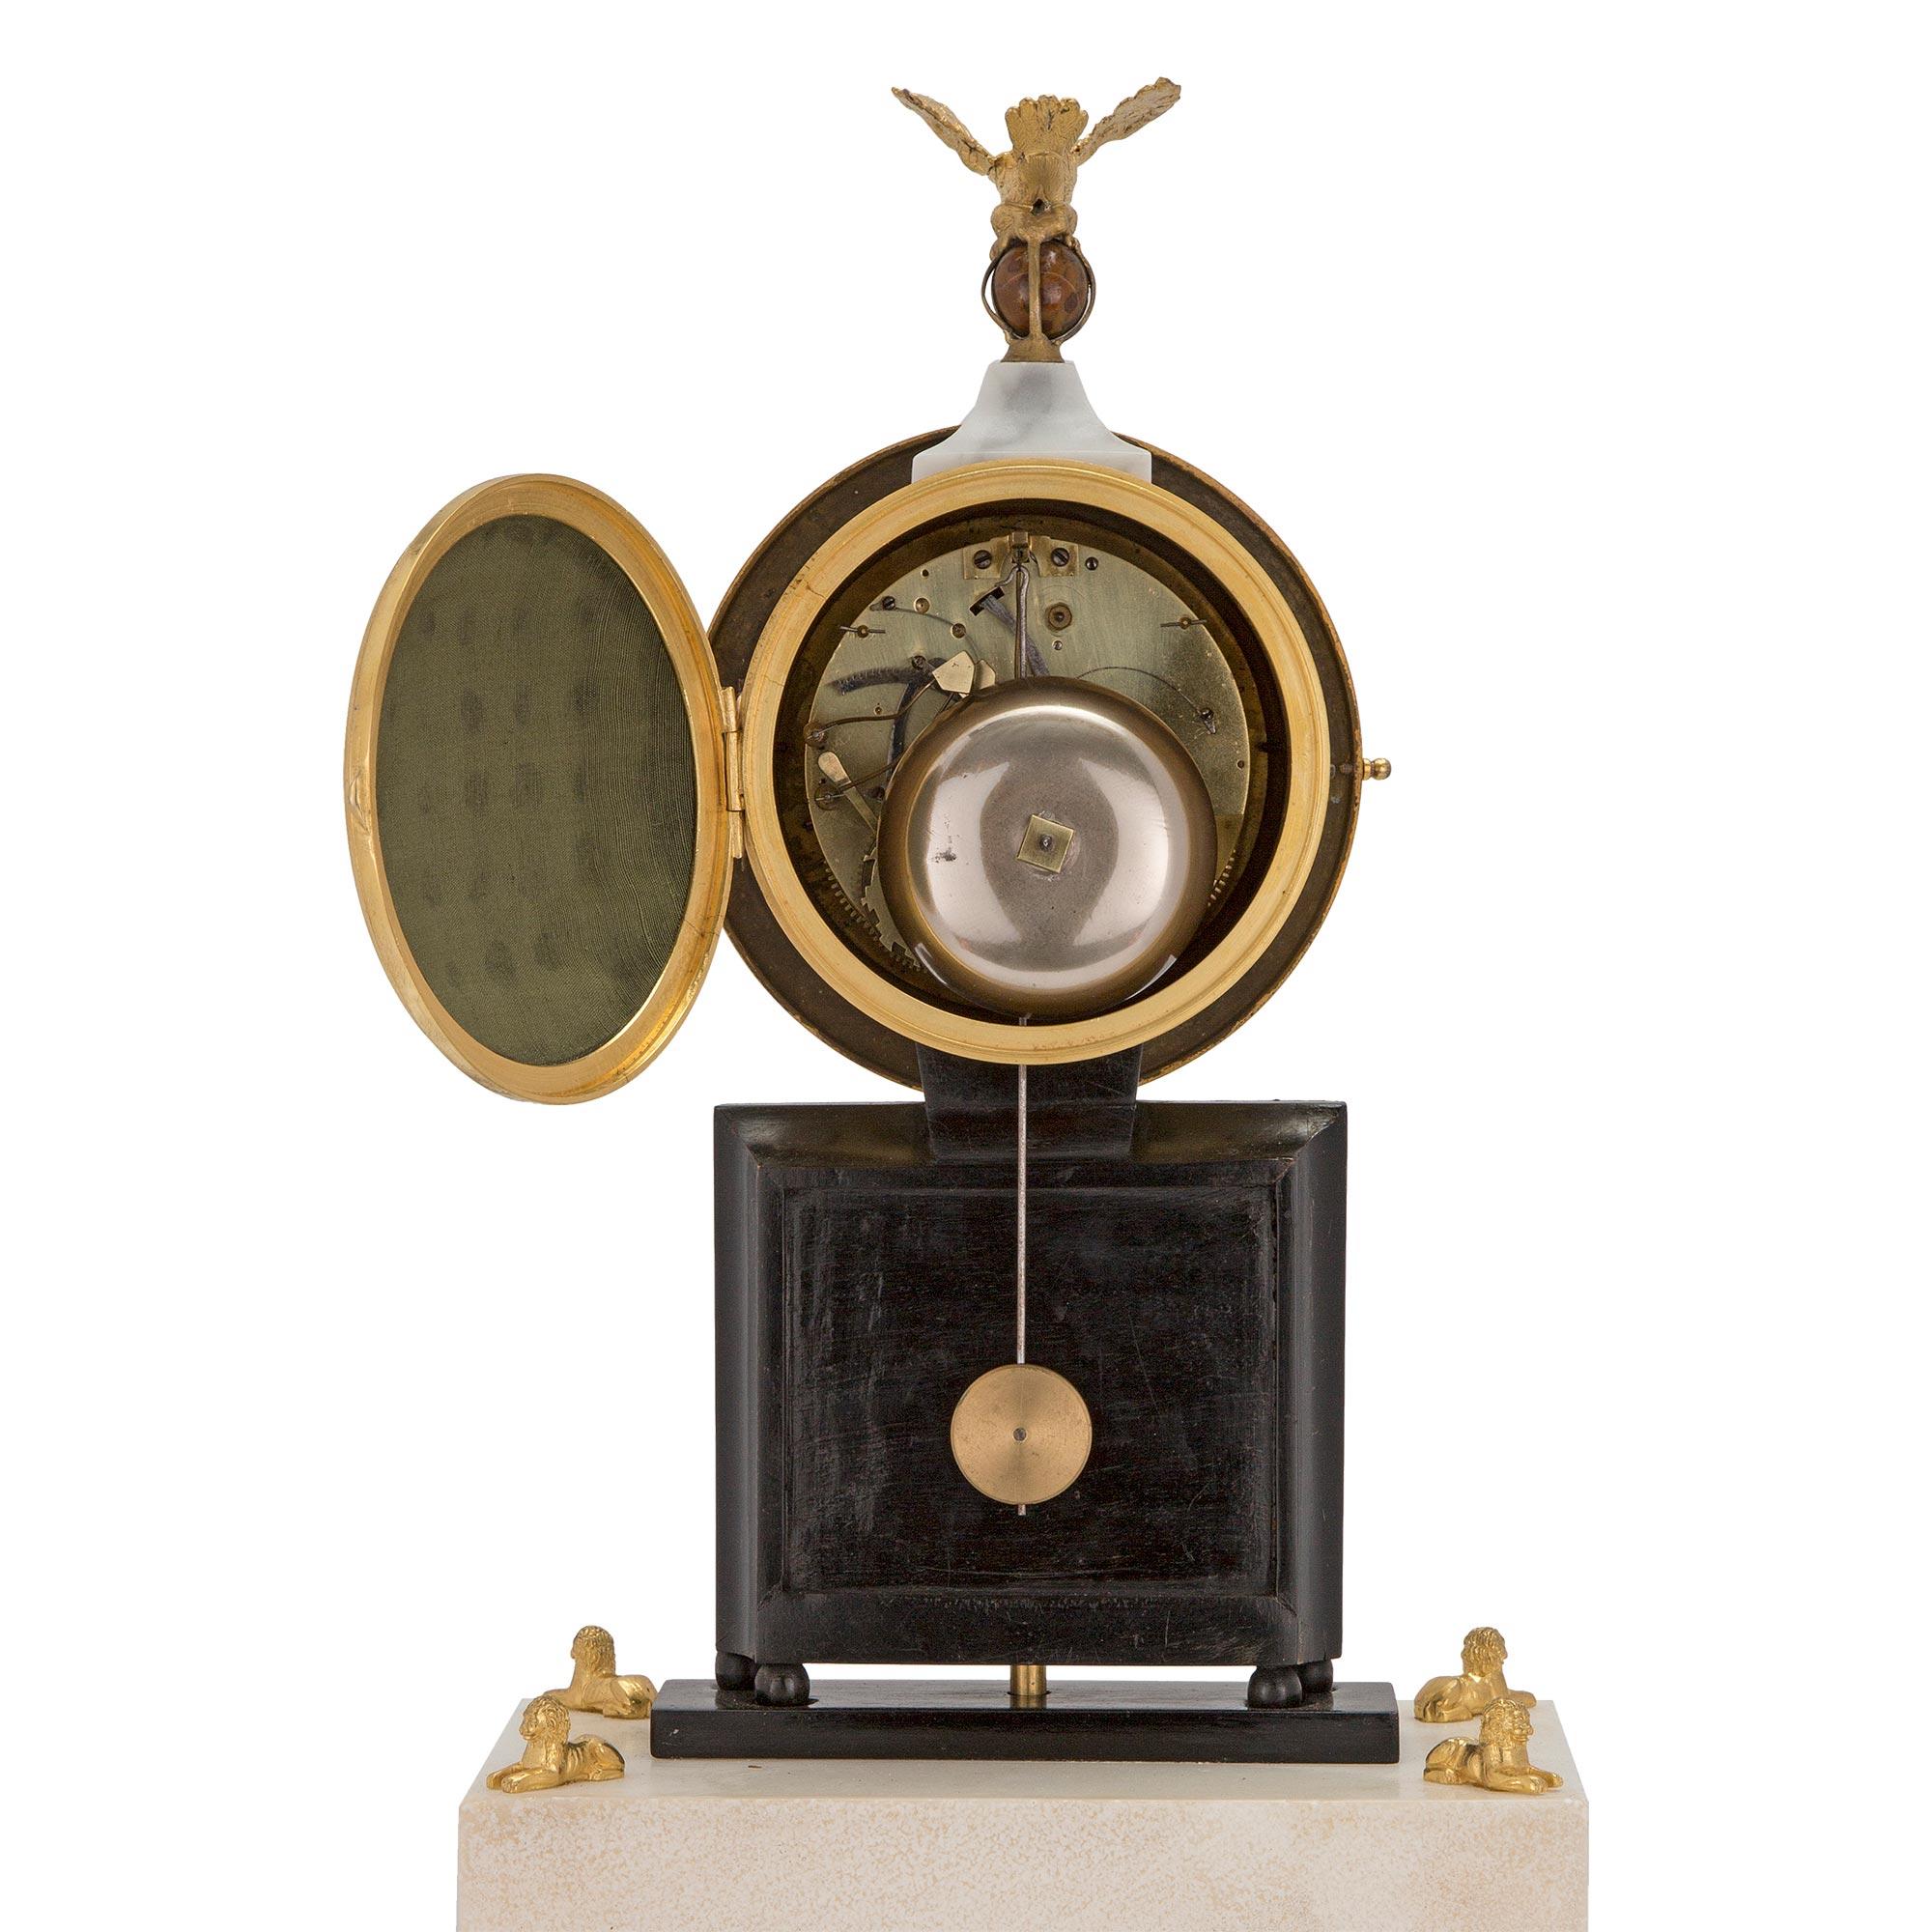 French Early 19th Century Marble and Ormolu Quarter Strike Clock with Sundial For Sale 4